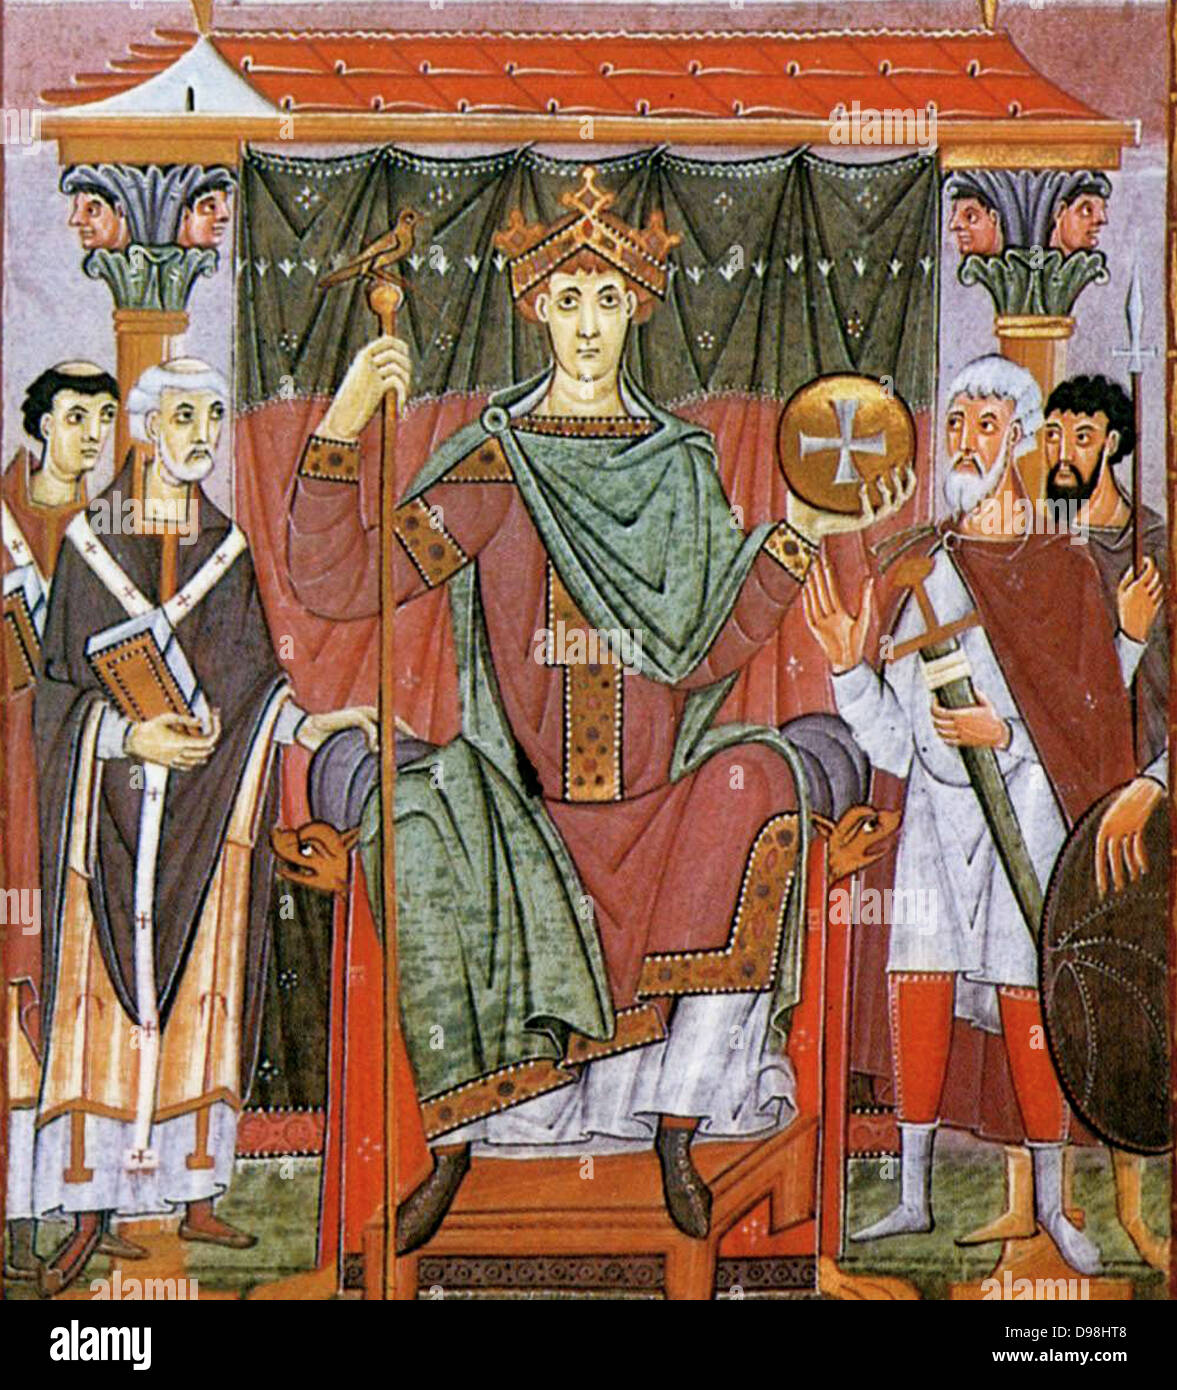 Painting showing the peoples of the world adoring Otto III, from the Gospels of Otto III. (View Larger) The Gospels of Otto III, probably produced in Reichenau Abbey, in the scriptorium headed by the monk Liuthard, for Holy Roman Emperor Otto III, Circa 998 – 1001. Otto is shown seated disdainfully on his majestic throne, flanked by two priests with books Stock Photo